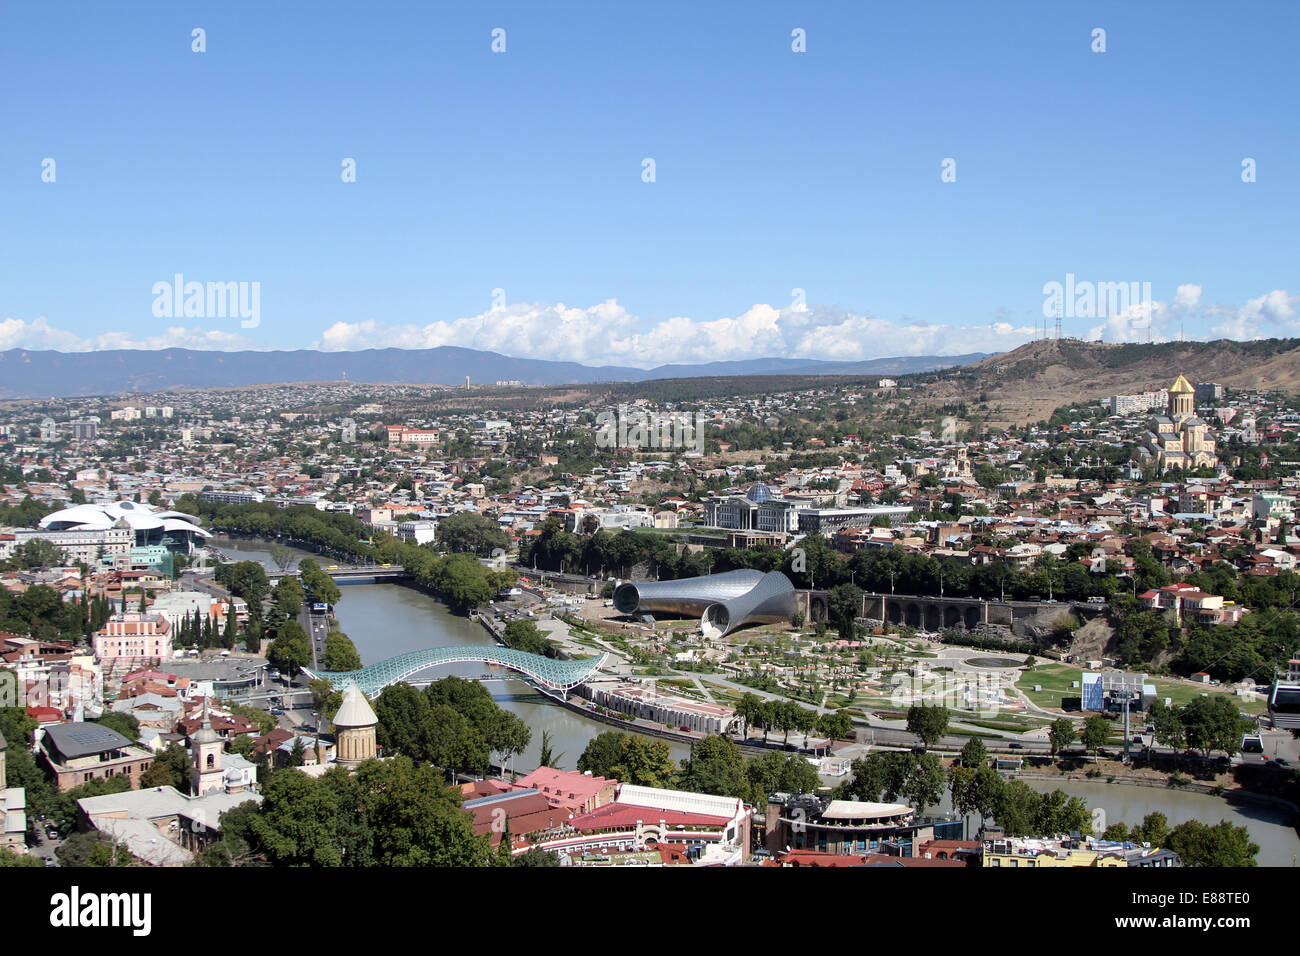 View over the centre of Tbilisi, Georgia, taking in the Mtkvari River, the Bridge of Peace and Rike Park. Stock Photo